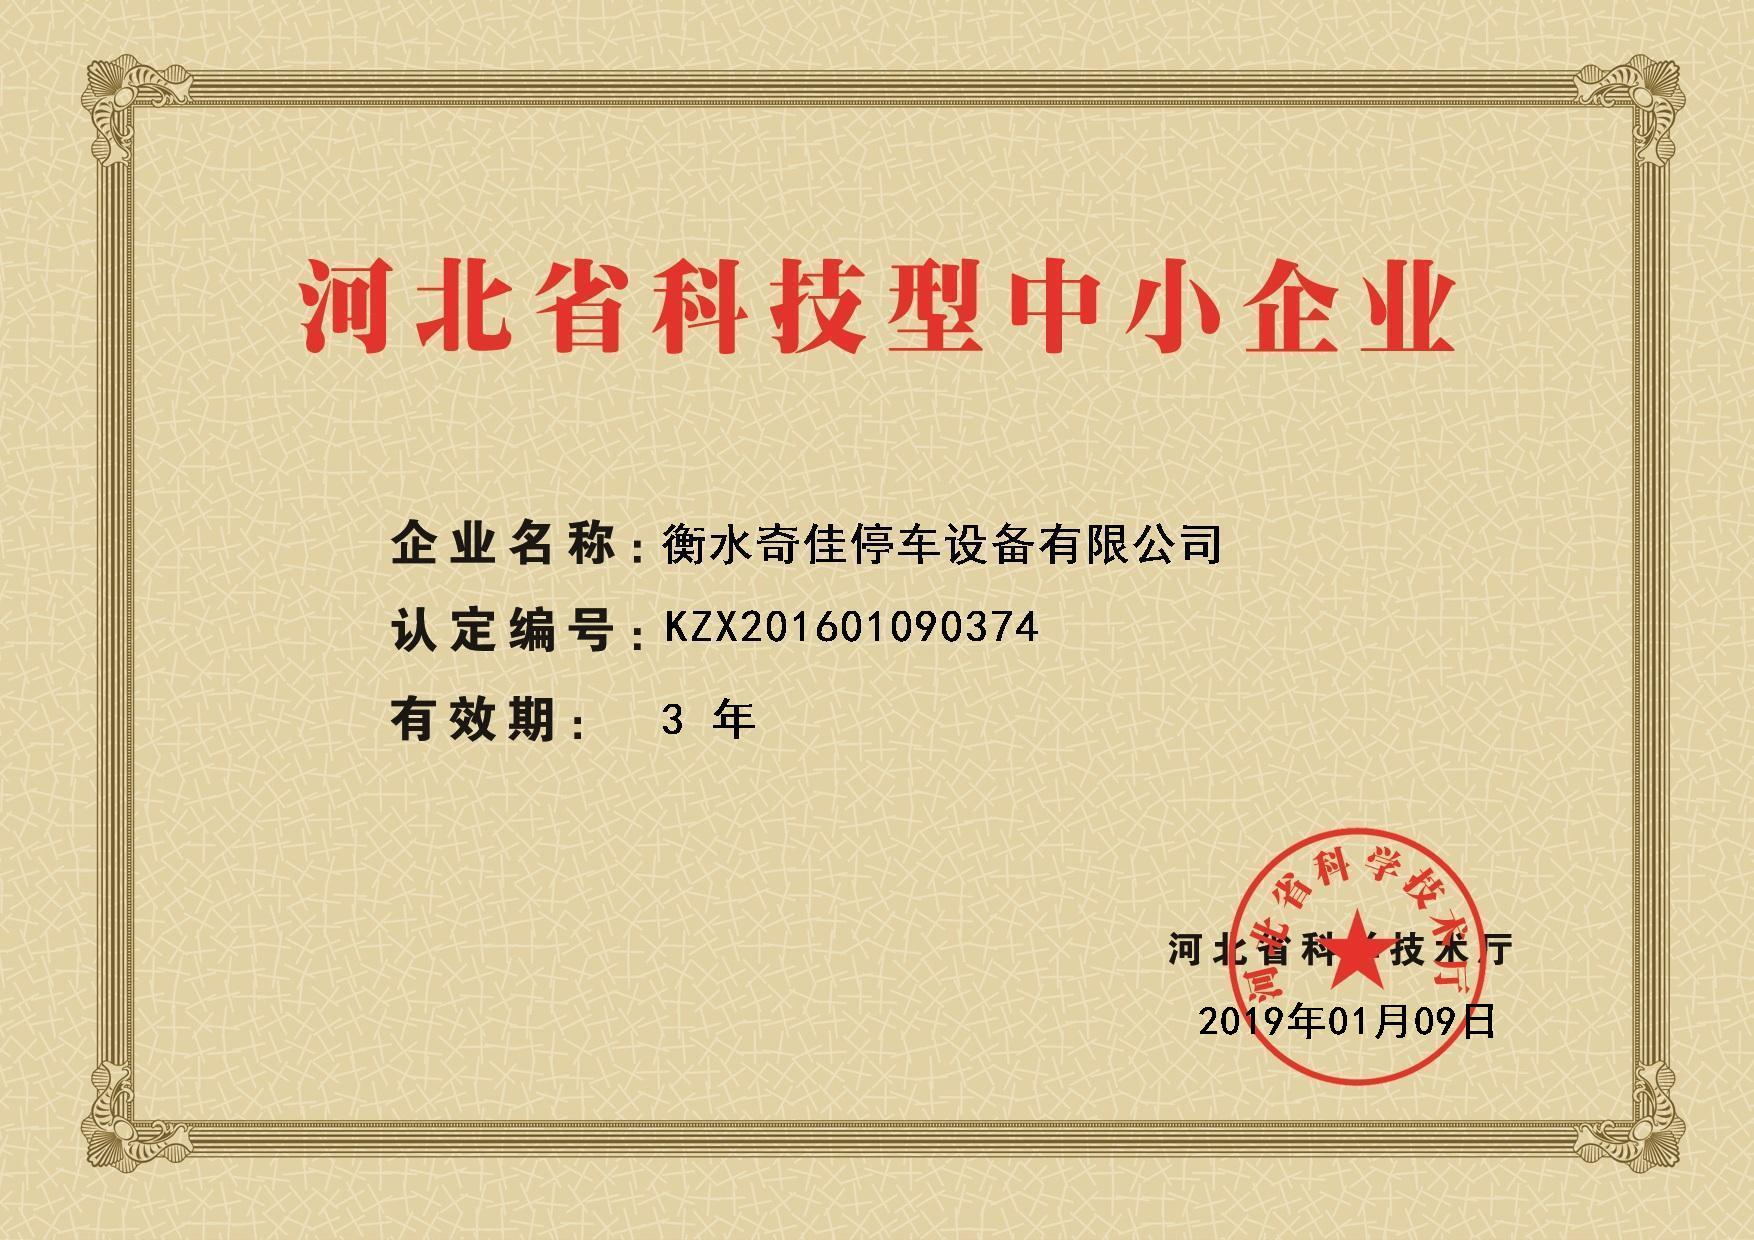 Hebei province science and technology small and medium-sized enterprise certificate